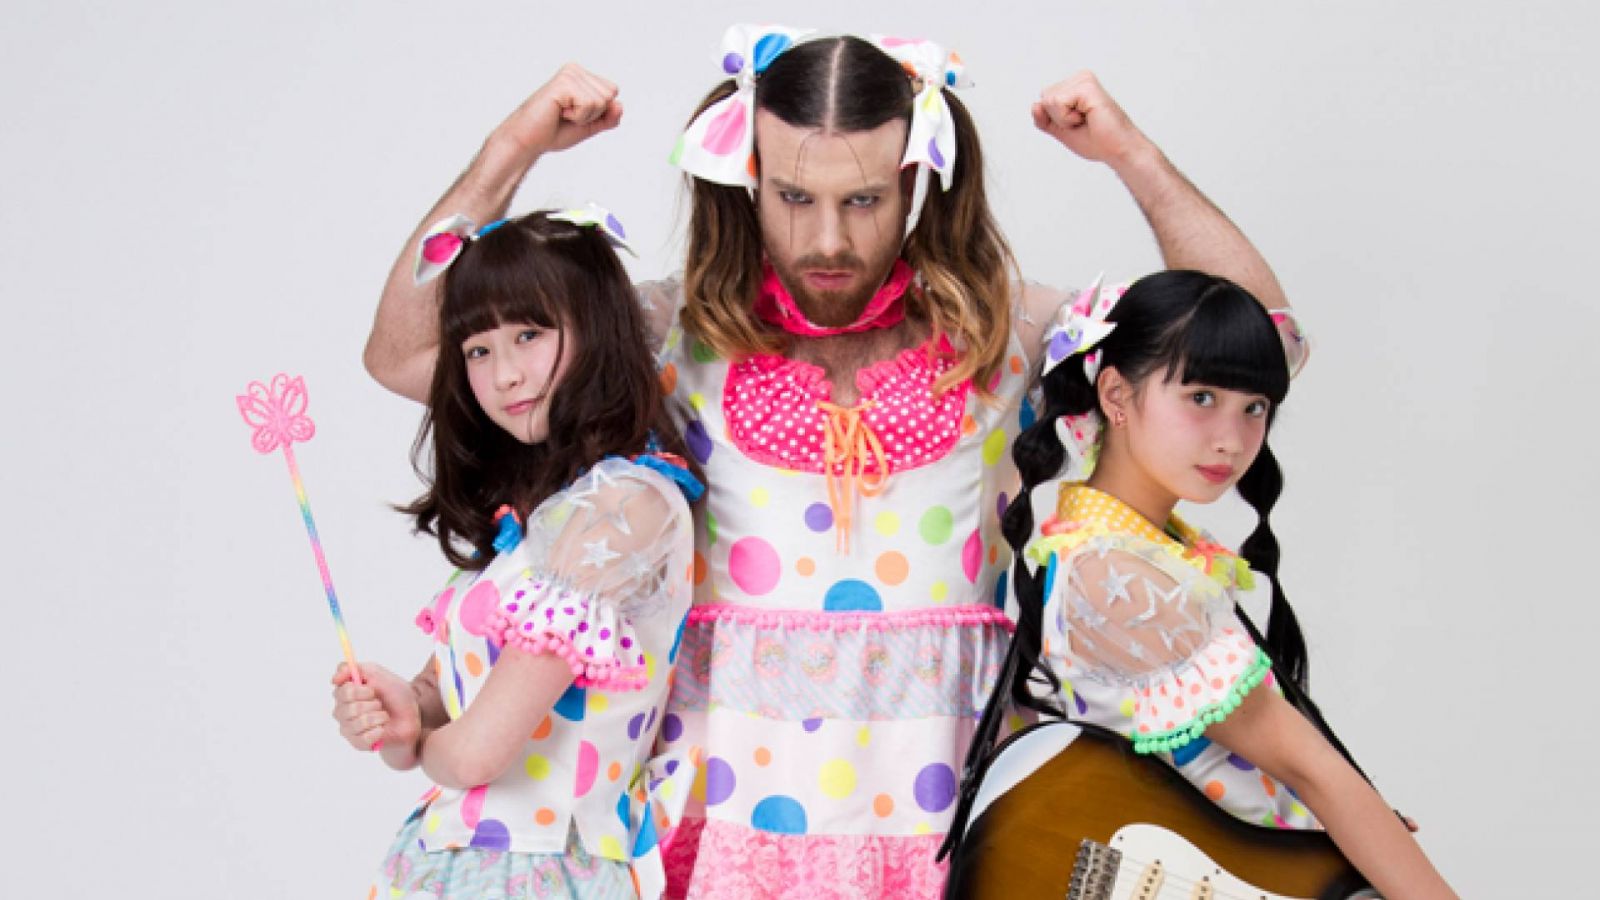 LADYBABY © 2015 clearstone Co., Ltd. All rights reserved.